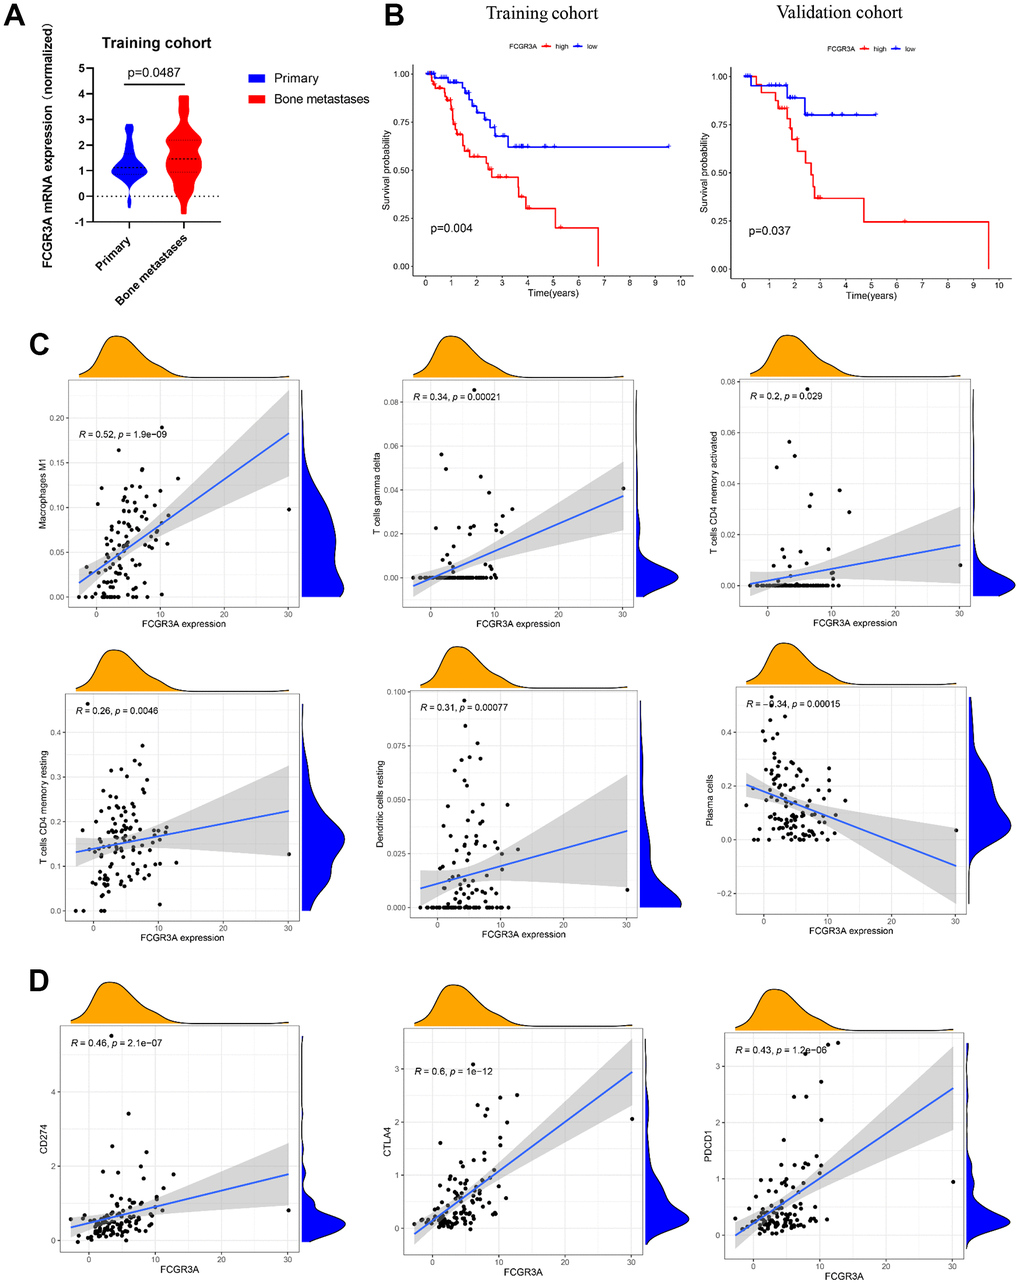 The linkage between FCGR3A and TIICs. (A) Relative FCGR3A expression level in the normal bone marrow and PCa bone metastases samples in the training set. (B) The OS analysis of FCGR3A expression in the training and validation sets. (C) Correlation between FCGR3A expression and infiltration of M1 macrophages, gamma delta T cells, CD4 memory activated T cells, CD4 memory resting T cells, resting dendritic cells, and plasma cells in the training set. (D) Correlation analysis between FCGR3A expression and immune checkpoints of CD274 (PD-L1), PDCD1 (PD-1), and CTLA4 in the training set.